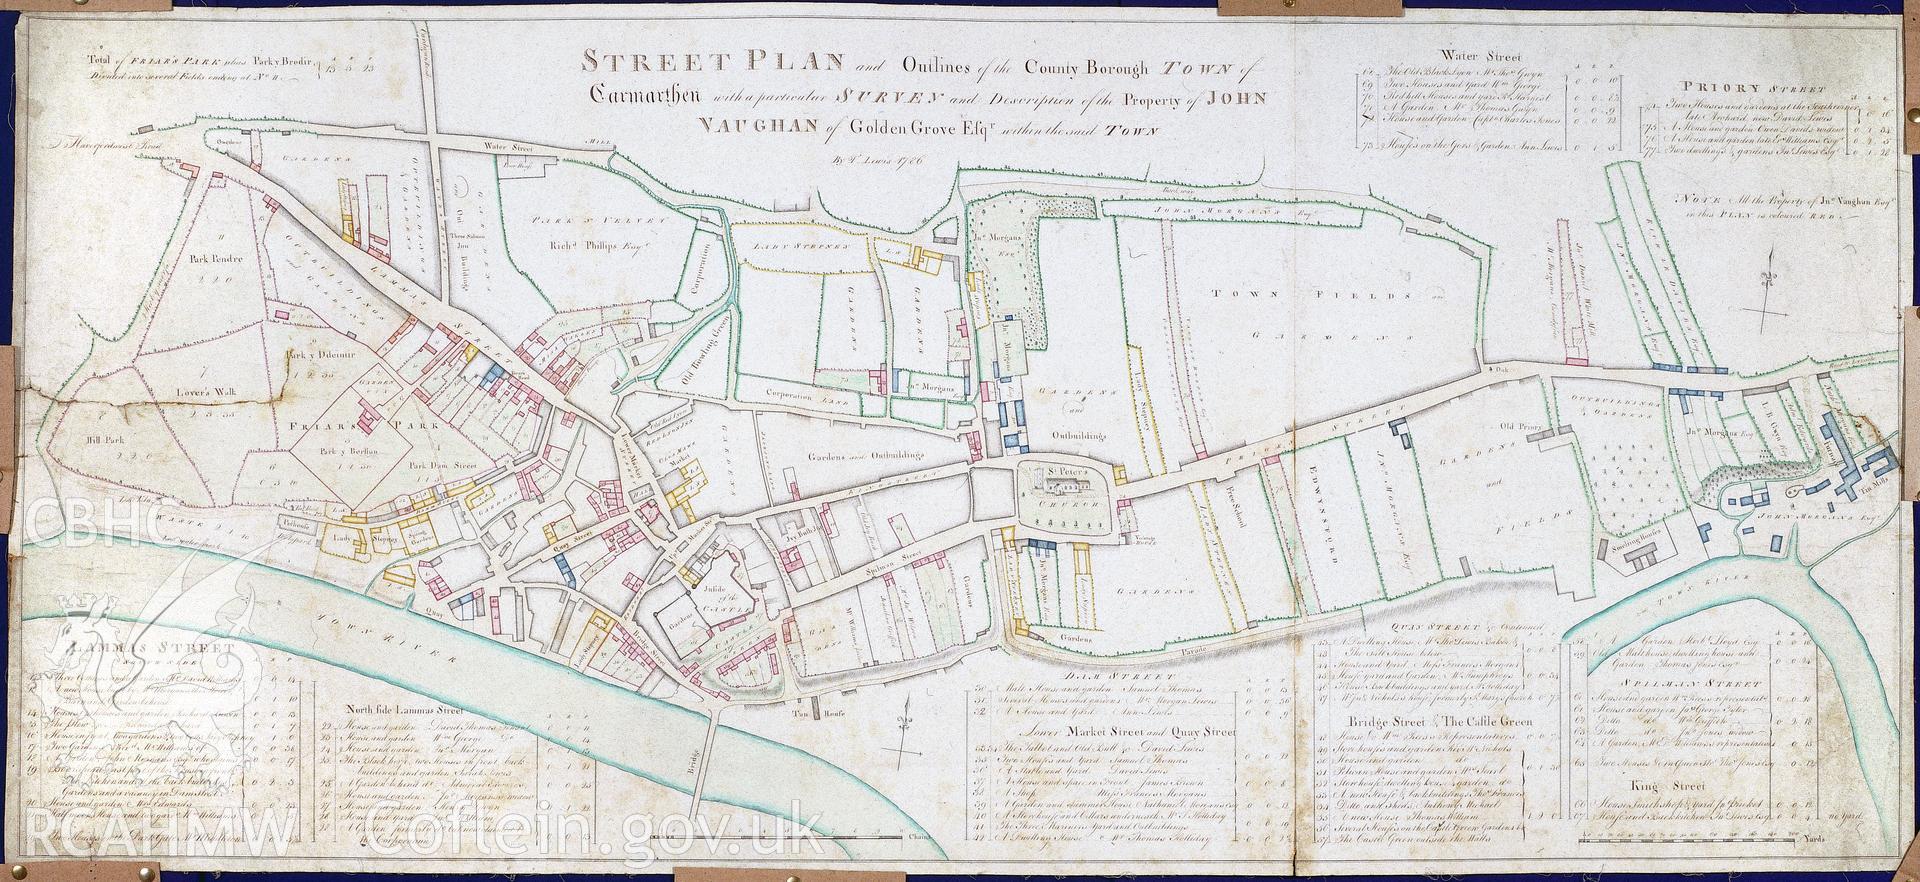 RCAHMW colour transparency showing coloured street plan of Carmarthen town dated 1786.